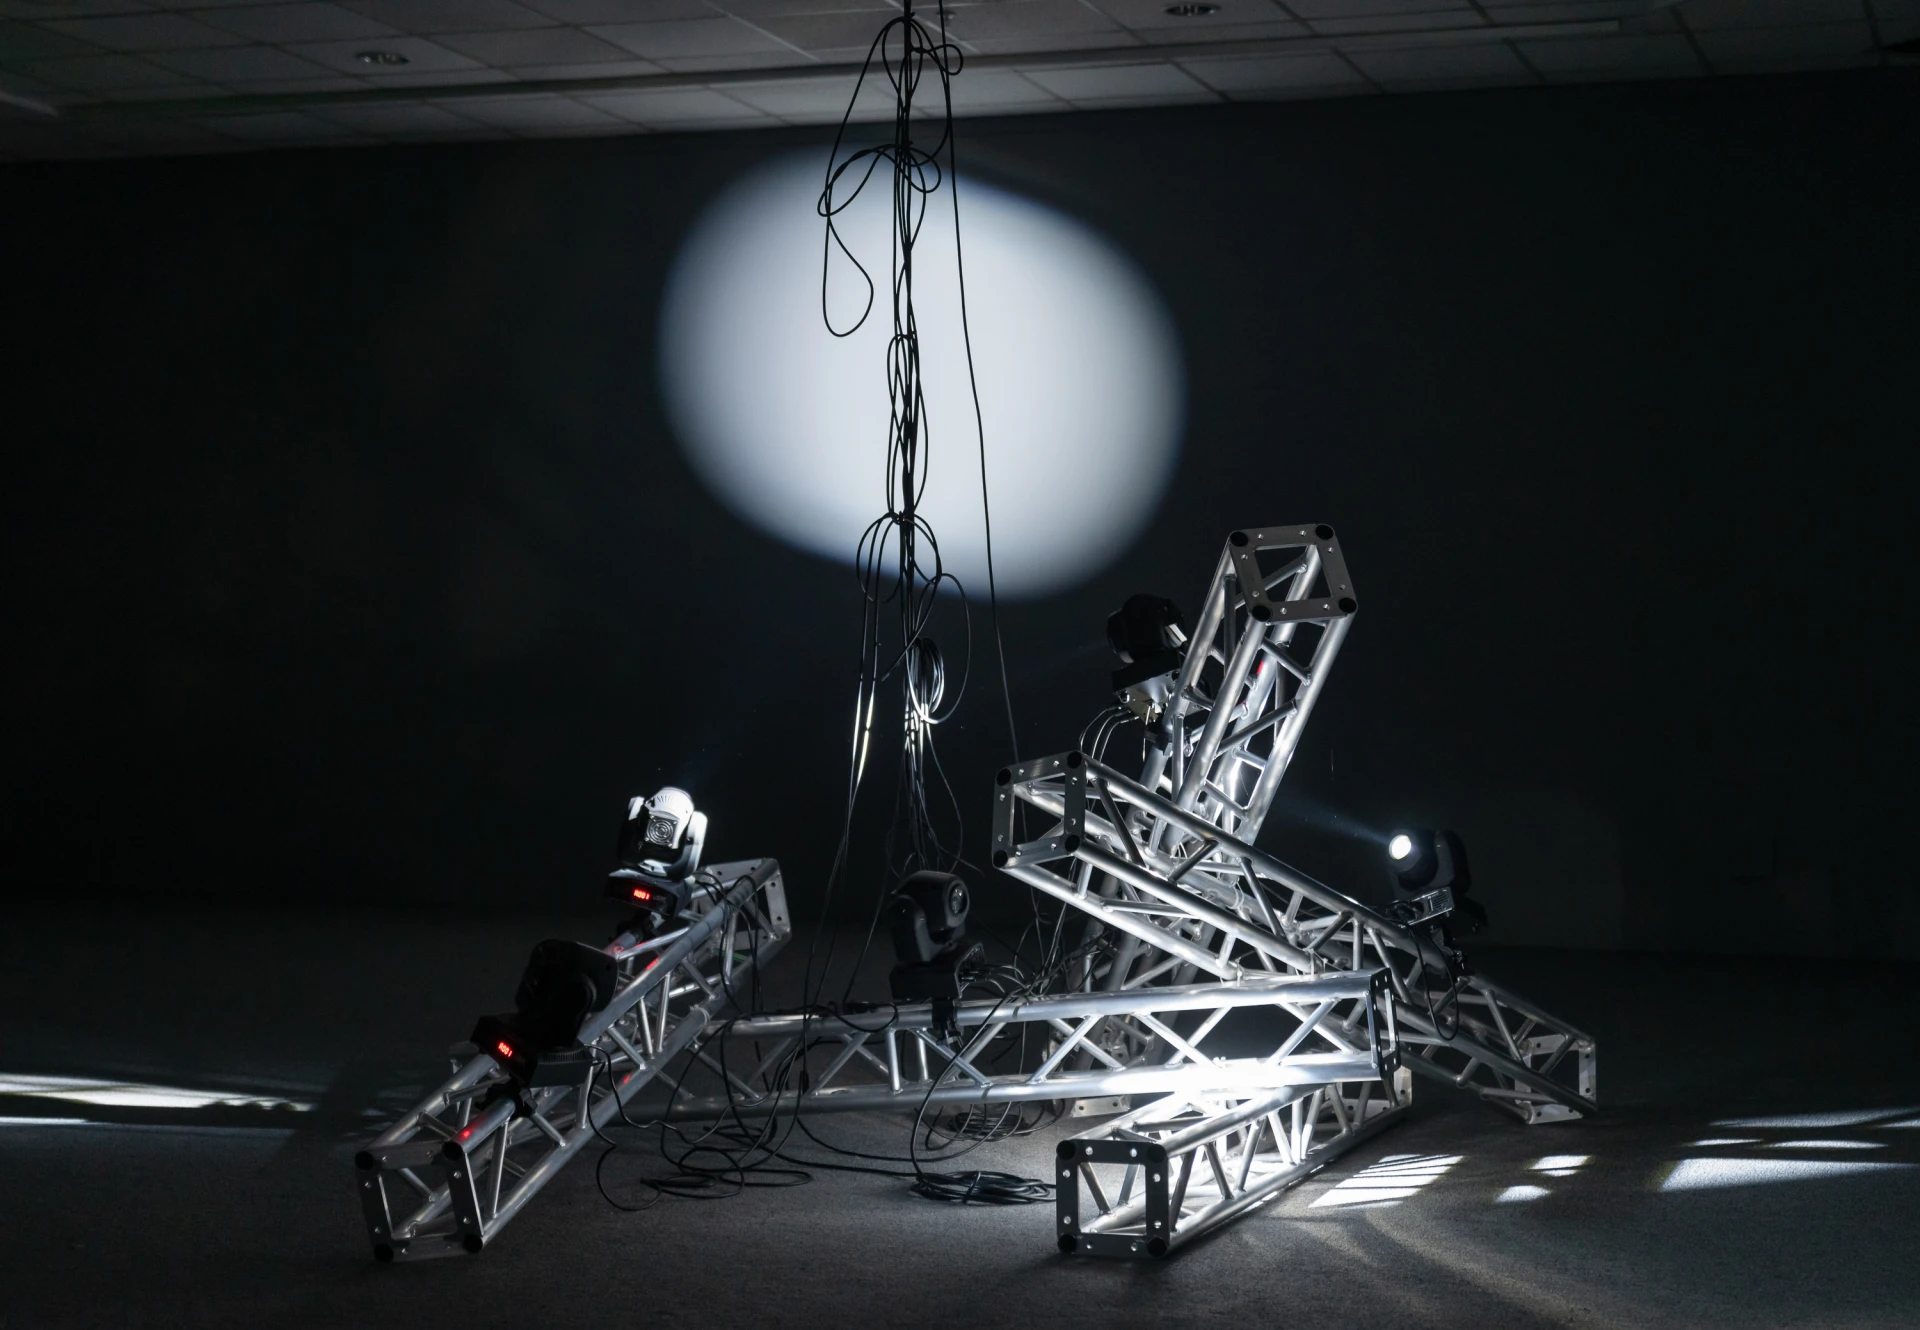 <i>PRIVATE DANCER</i>, 2020, lighting truss and moving head LED lights, dimensions variable. Courtesy of the artist and Commonwealth and Council, Los Angeles and Mexico City.-圖片